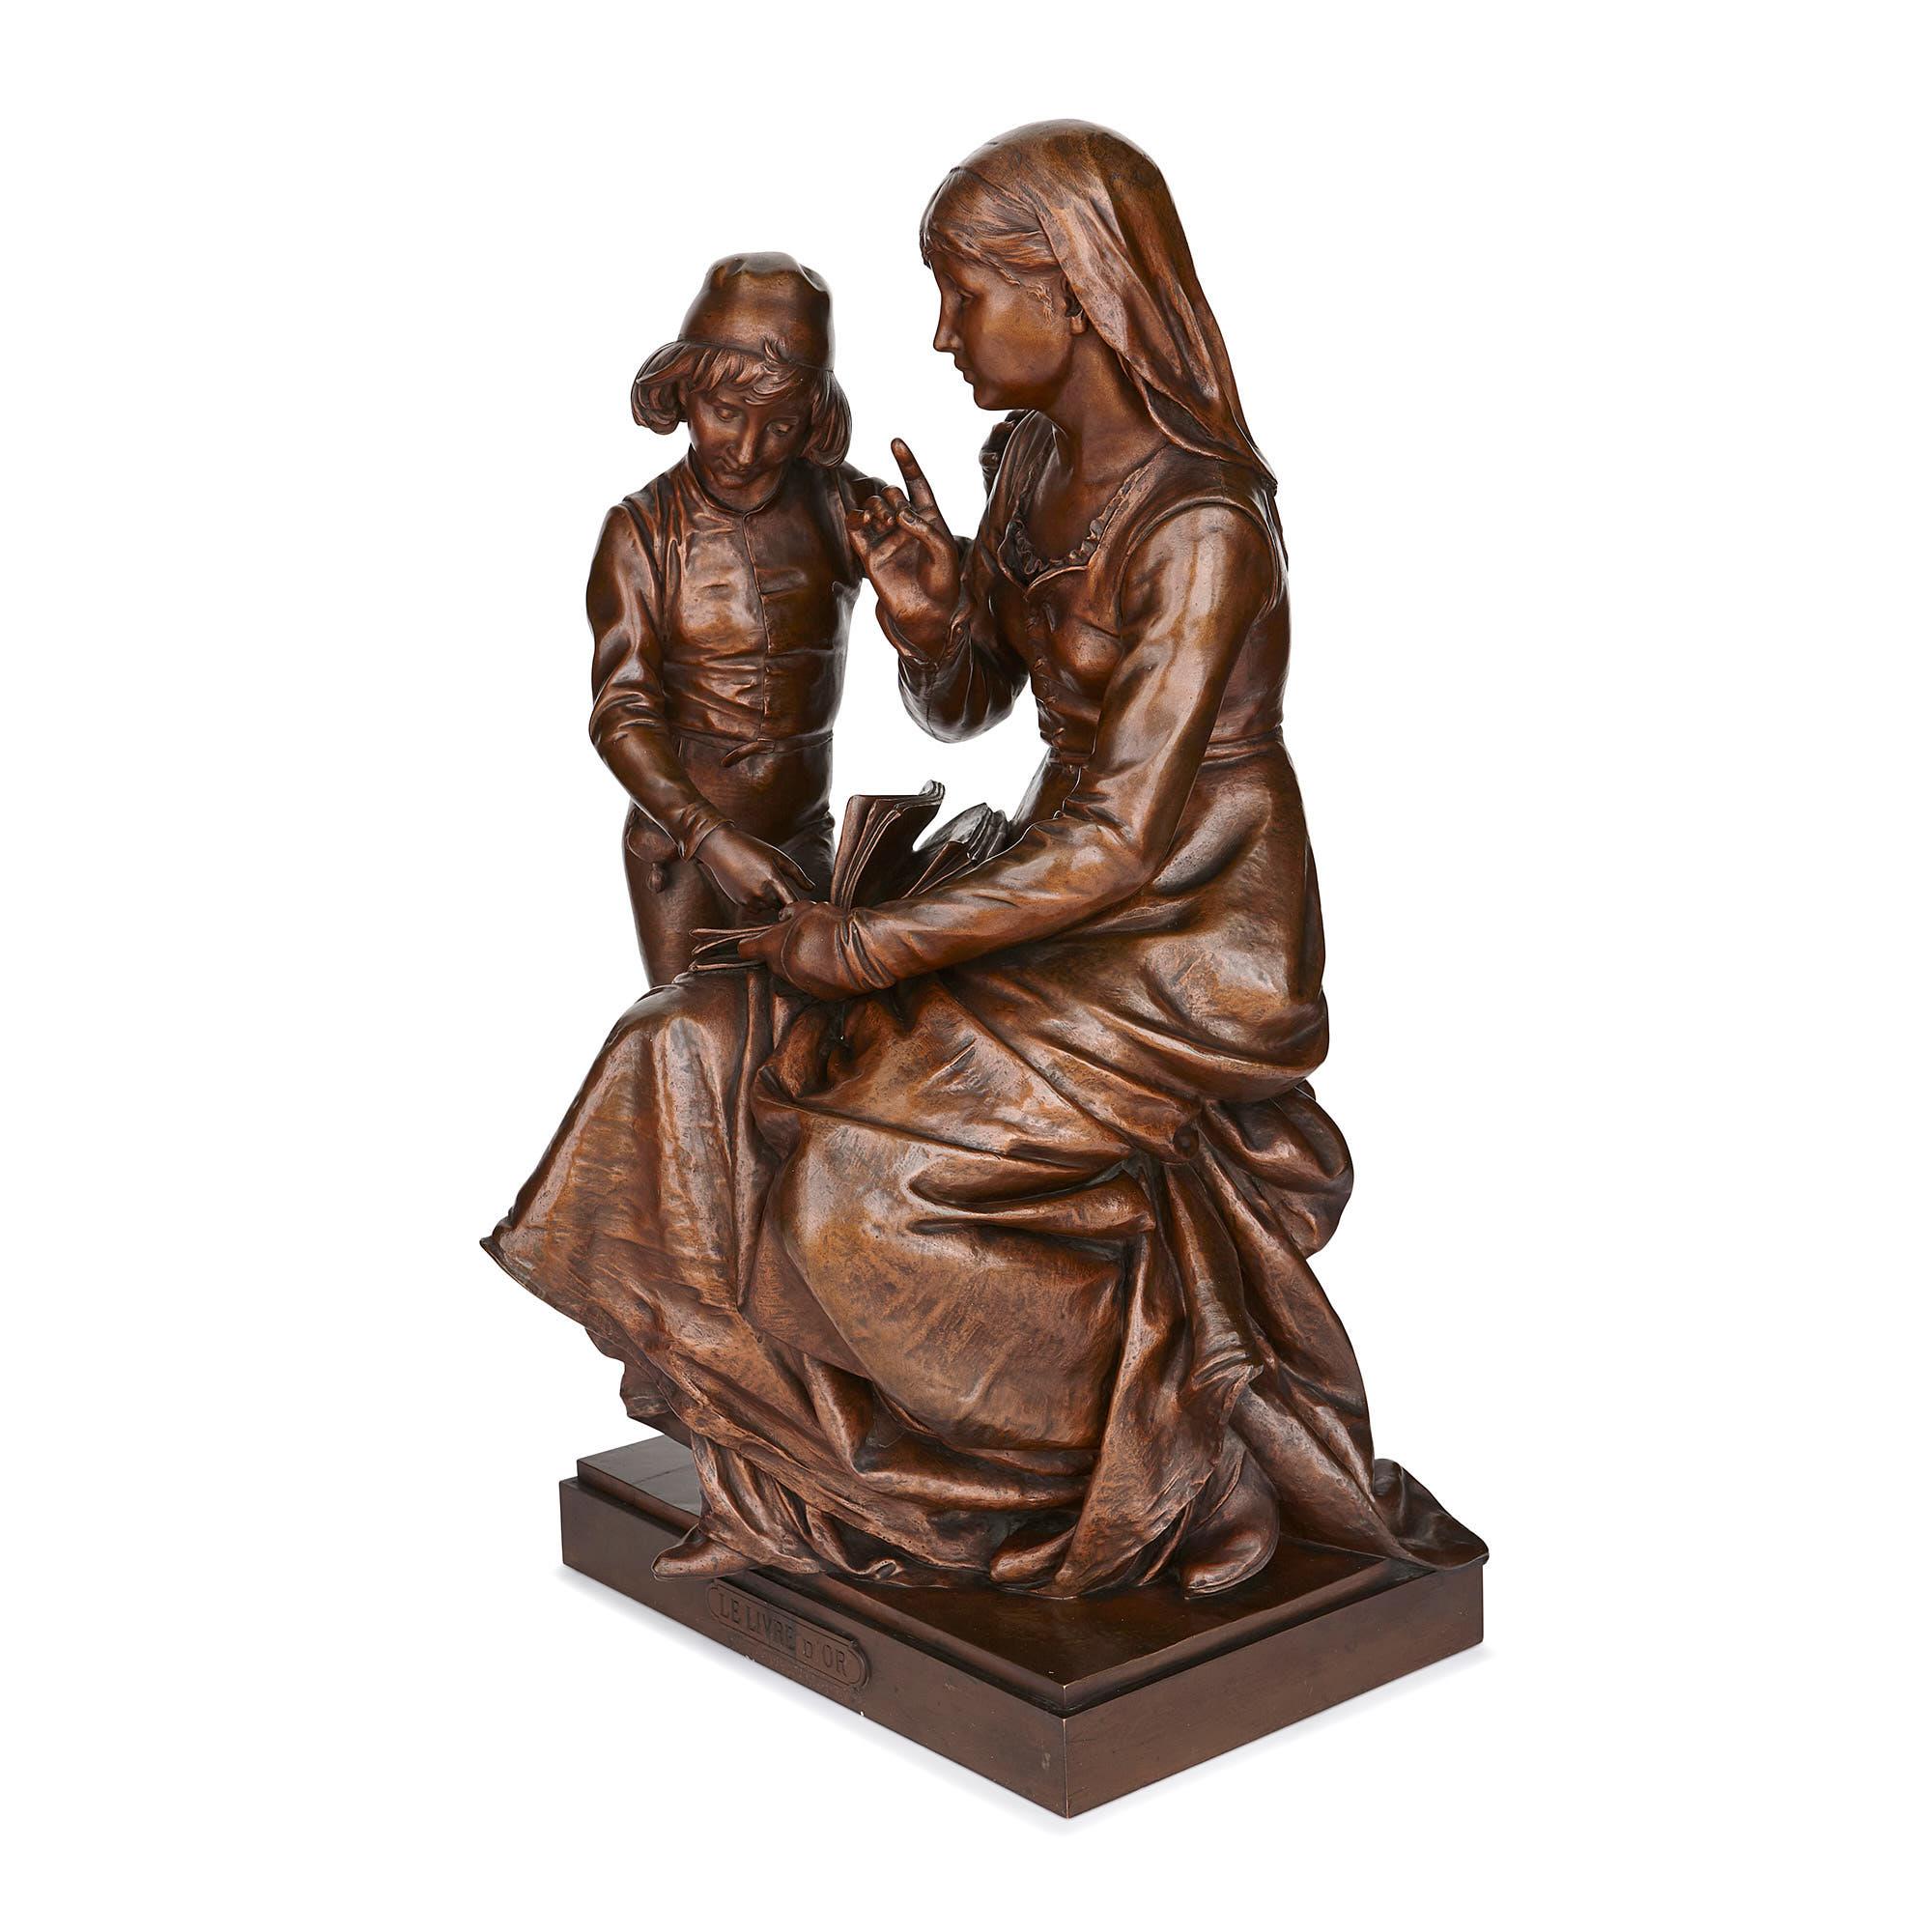 This beautiful sculpture of a mother and child was created in circa 1900 by the French sculptor, Vincent Desire Faure de Brousse. Faure de Brousse was an exceptionally talented artist who specialised in bronze, figurative sculptures, crafted in the